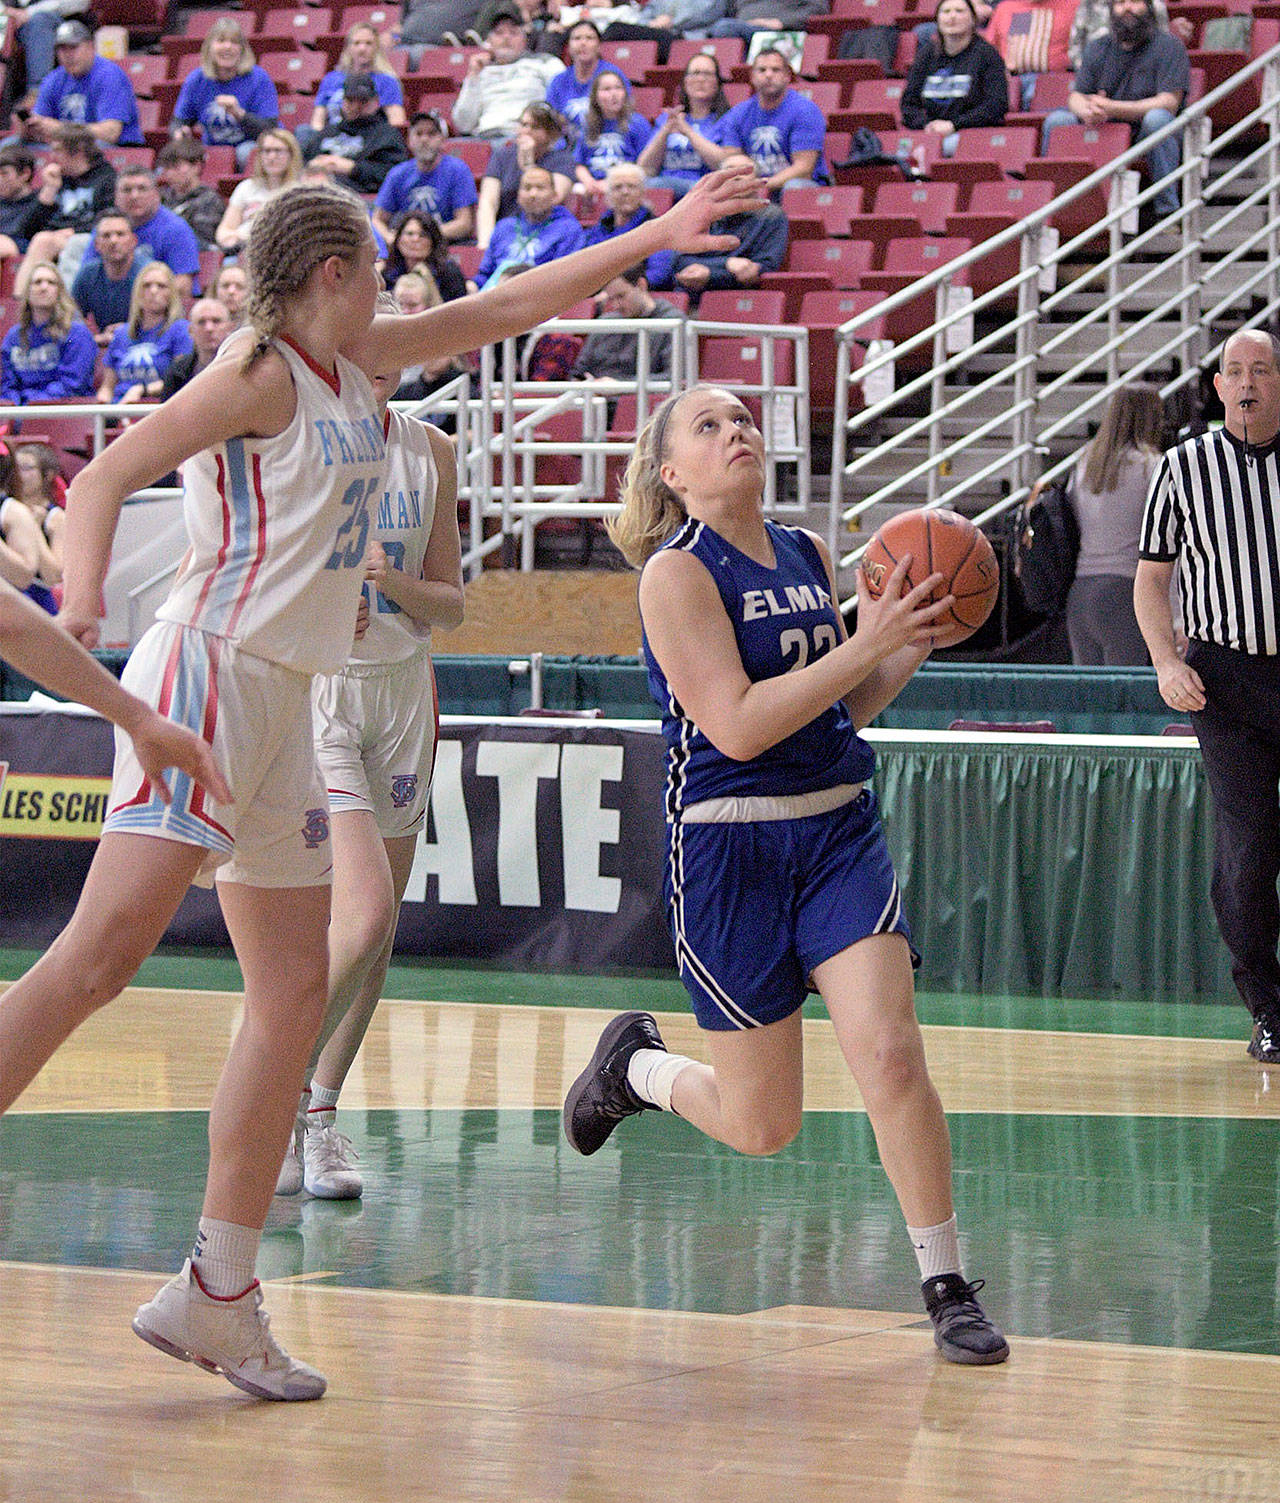 Elma’s Quin Mikel, right, drives the lane against Freeman’s Jordyn Goldsmith during the Eagles 49-25 loss in the first round of the 1A State Tournament on Wednesday at the SunDome in Yakima. (Photo by CJ Mudgett)